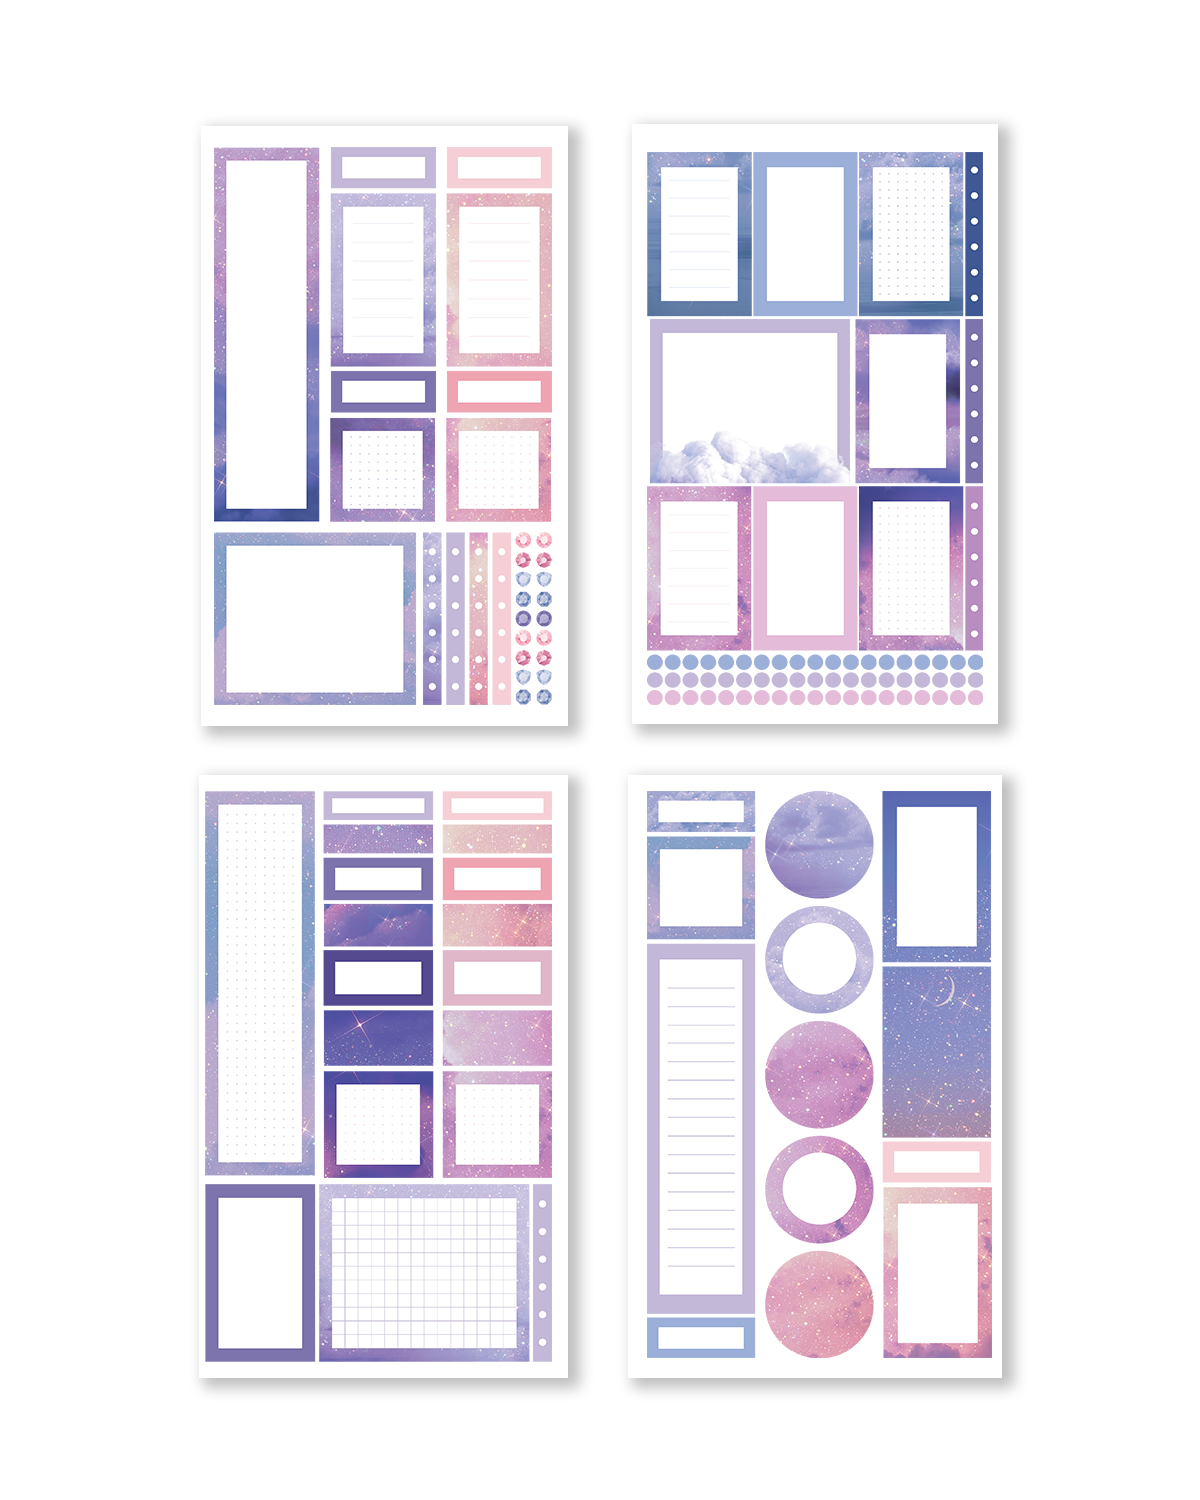 Shop Rongrong Midngiths Aesthetic Sticker Book for Planner